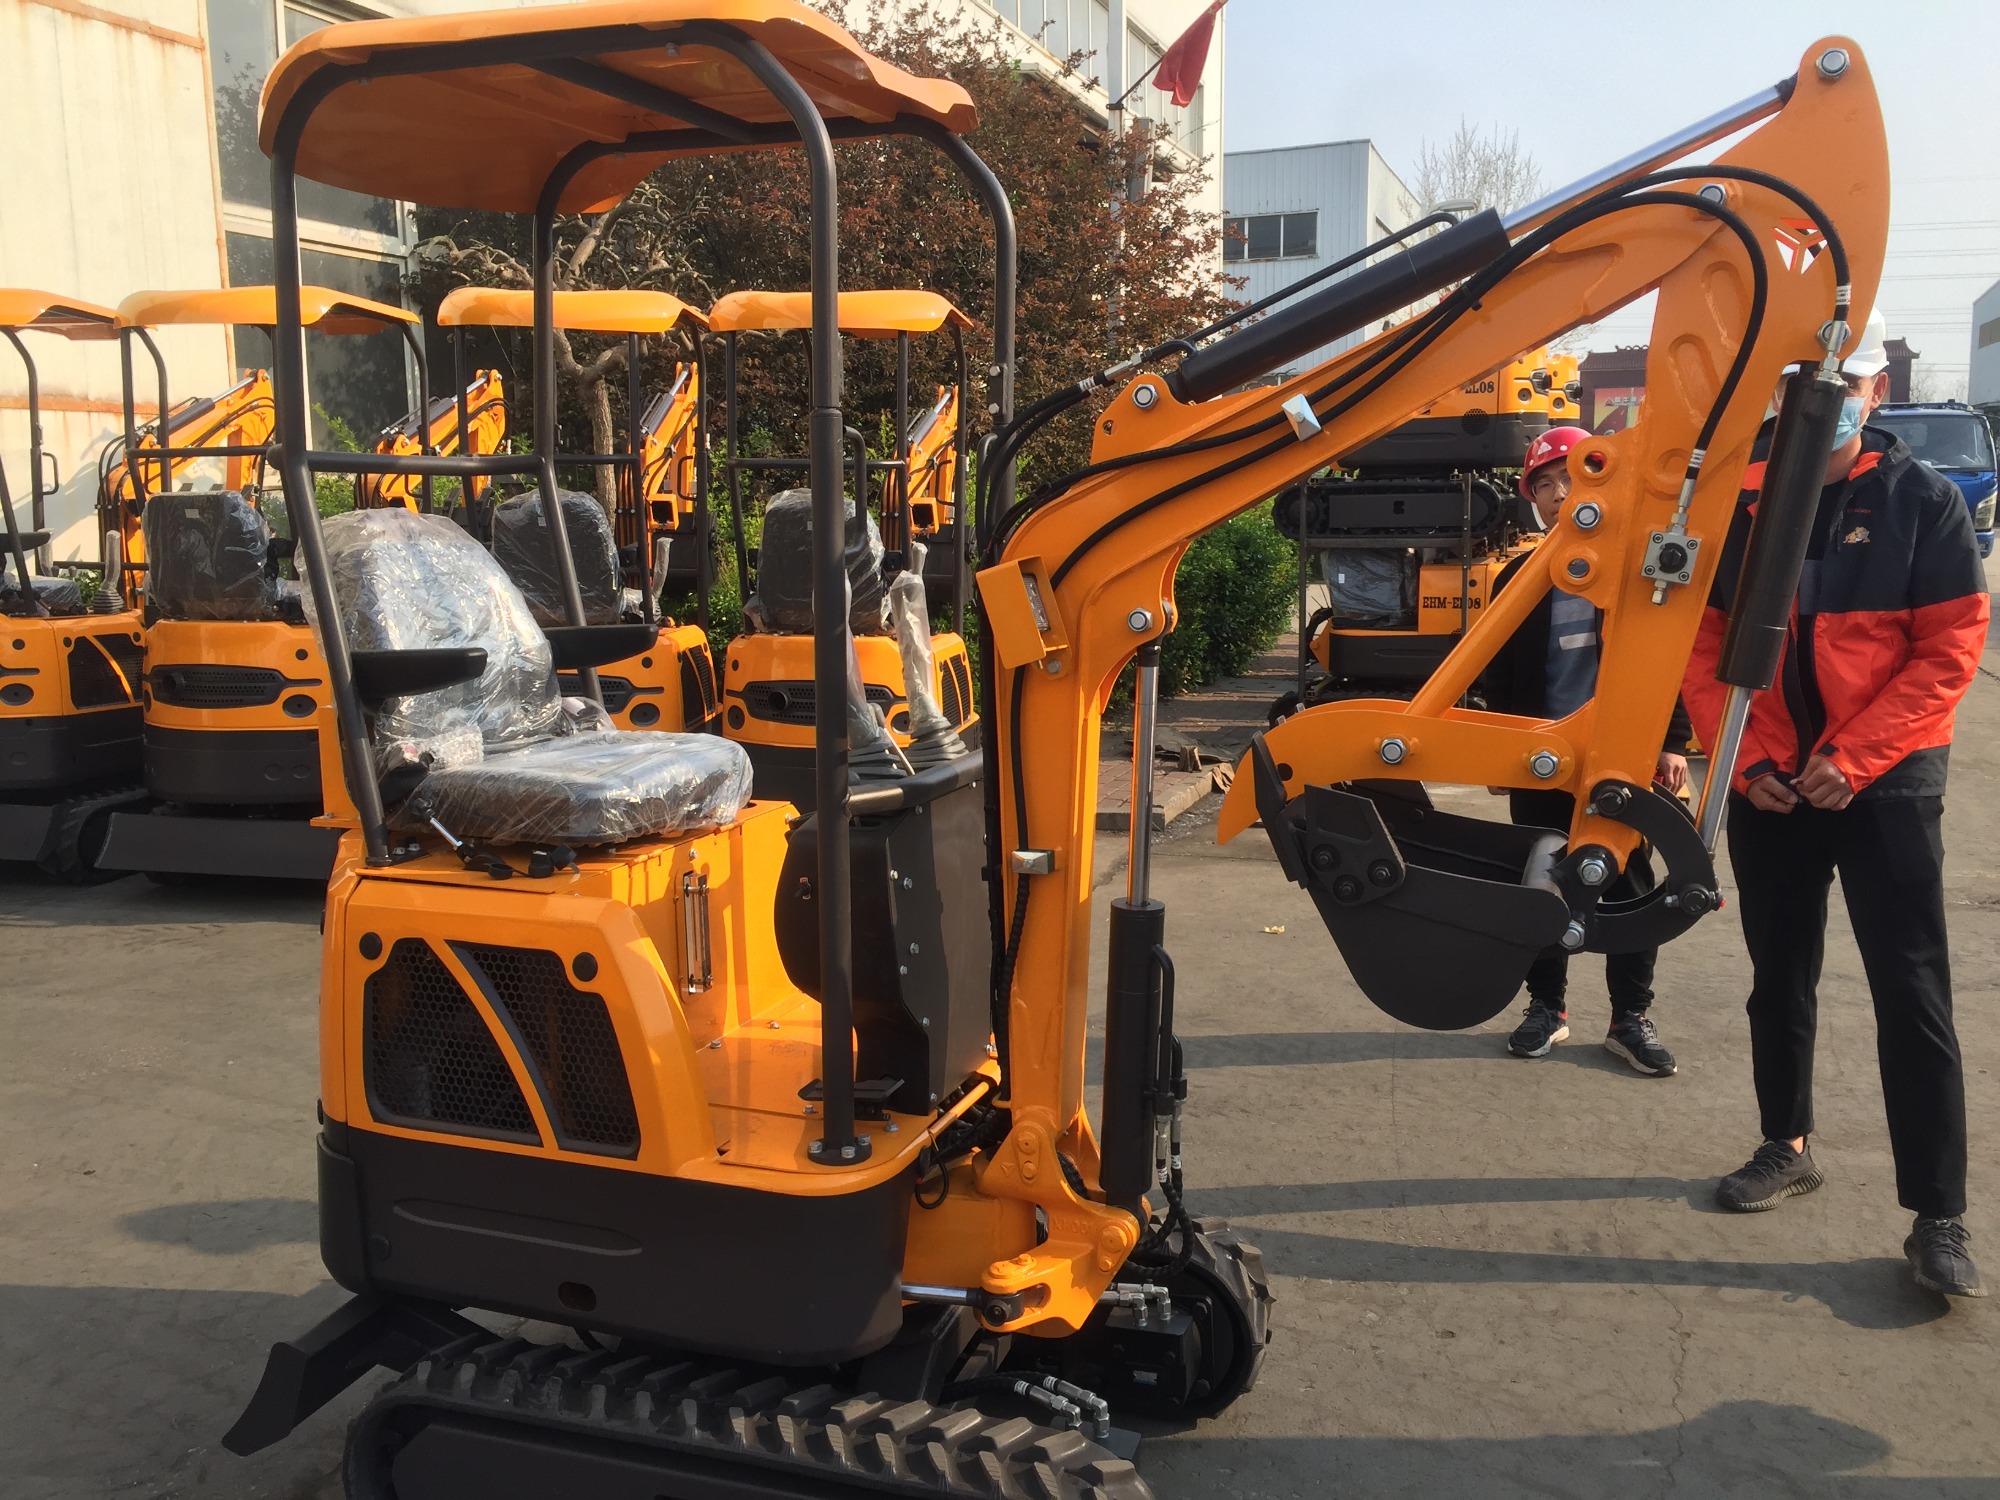 Dig-Dog Mini excavator procurement guide | Small excavator purchase process introduction